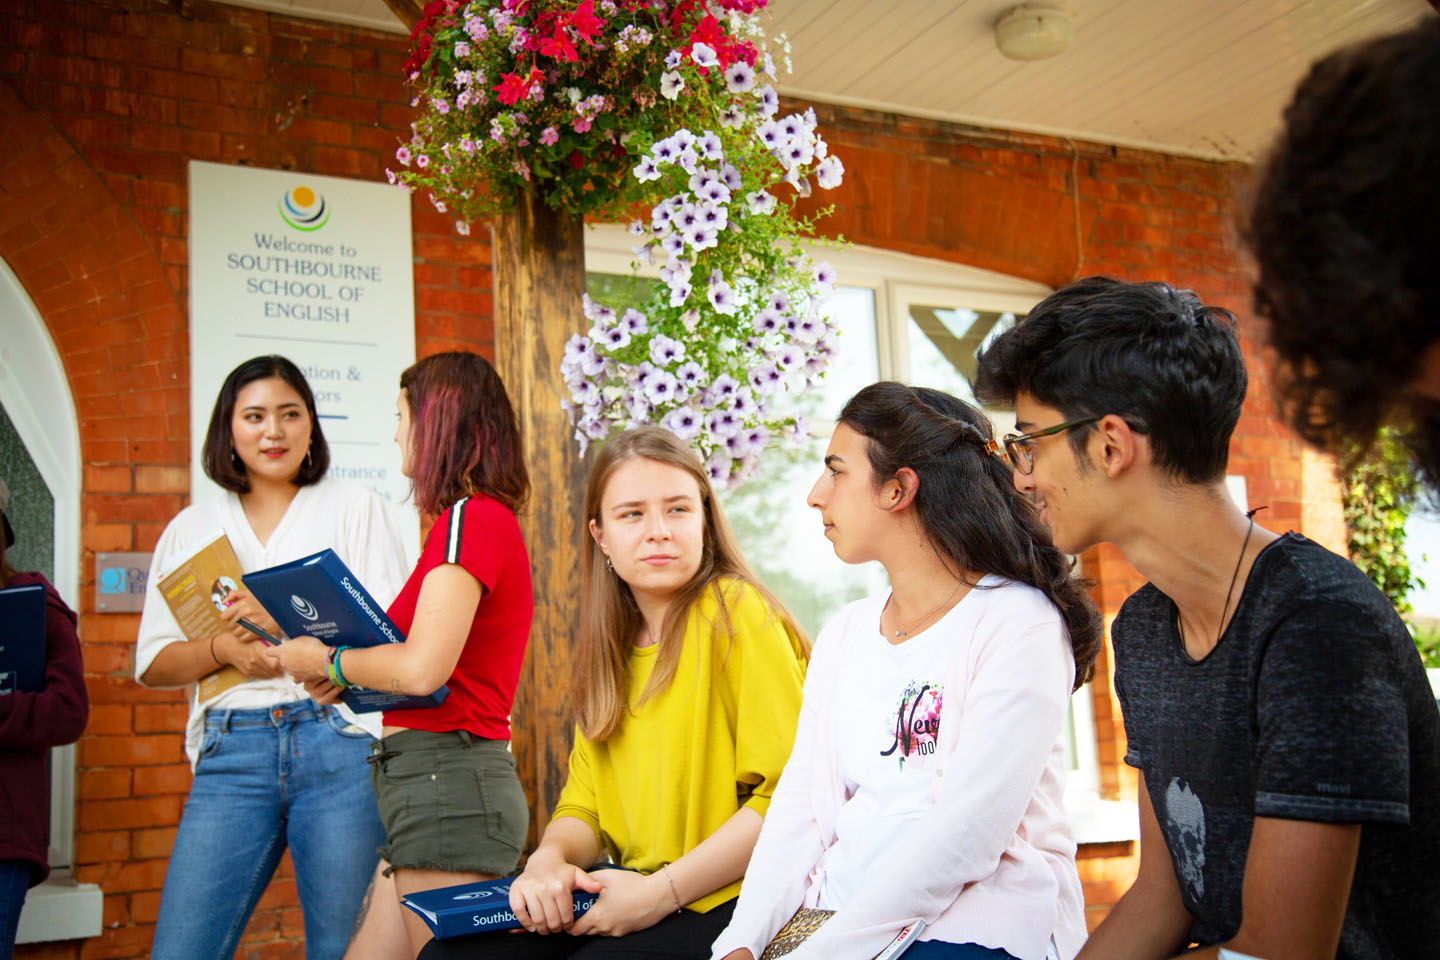 Students Southbourne School of English